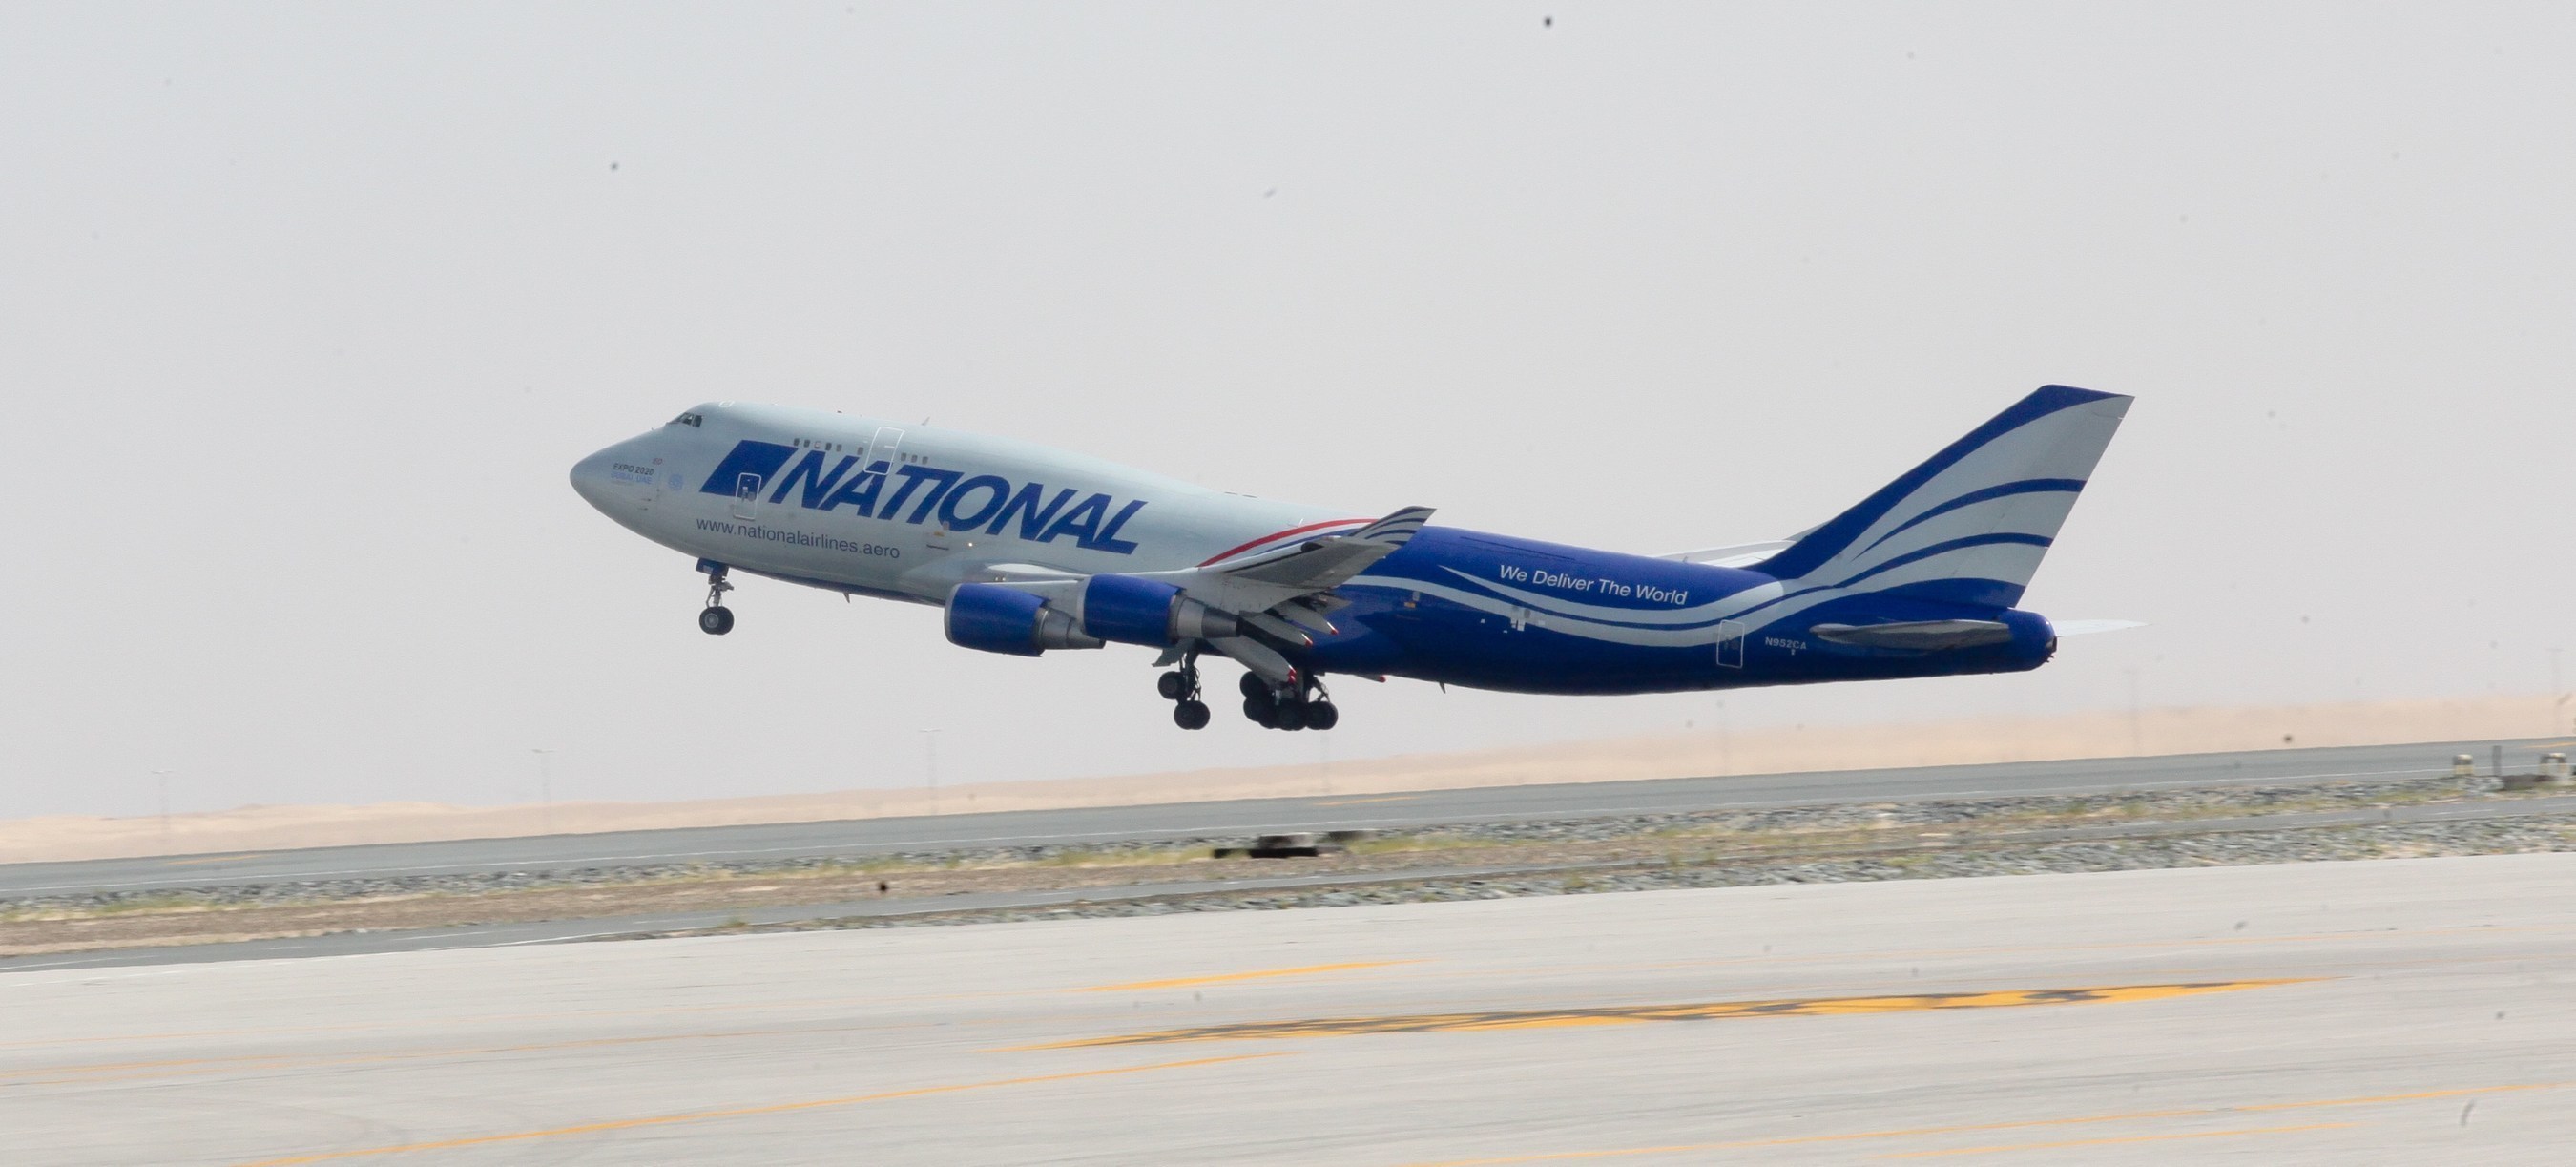 National Airlines flight loaded with critical relief equipment for Haiti takes off from Dubai.